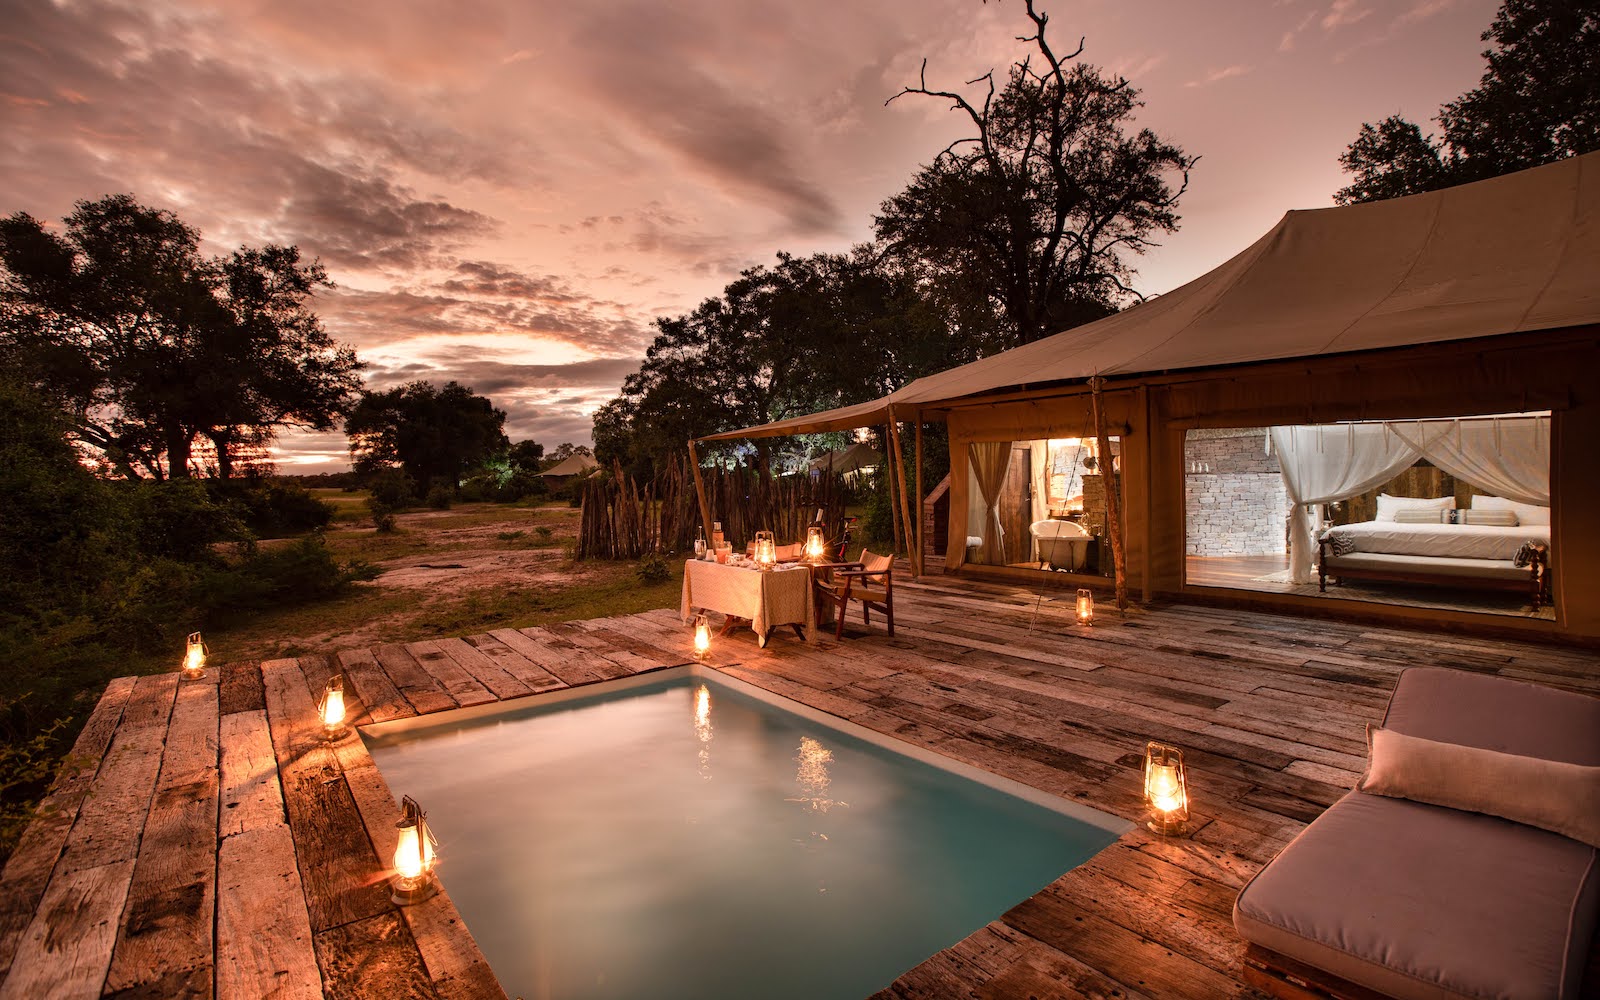 Tembo Plains Camp is tucked away into a thick riverine forest on the edge of the Zambezi River, in the private 128,000-hectare Sapi Private Reserve, east of Zimbabwe’s Mana Pools National Park. Tembo Plains Camp and the 2-bedroomed Tembo Plains Suite fit into our highest camp level offering, the Réserve Collection of camps. Fellow Réserve Collection camps include Zarafa Camp, Selinda Camp, Duba Plains in Botswana, Mara Nyika Camp, Mara Plains Camp and ol Donyo Lodge in Kenya. It is also a proud member of Relais & Châteaux – the only luxury Zimbabwean safari camp currently with this honour.